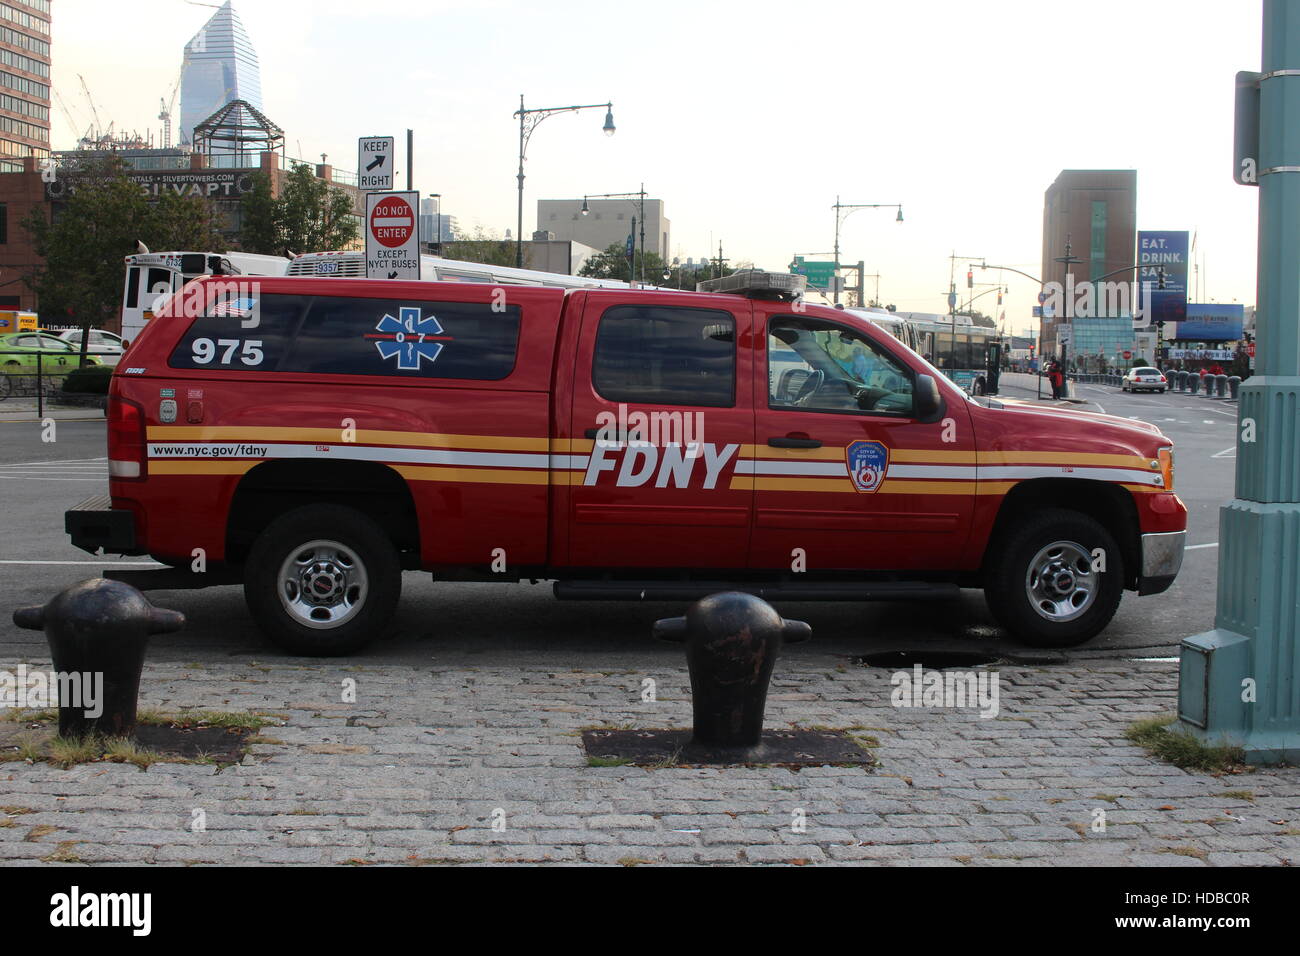 FDNY Fire Department New York vehicle car city new york NYC Stock Photo